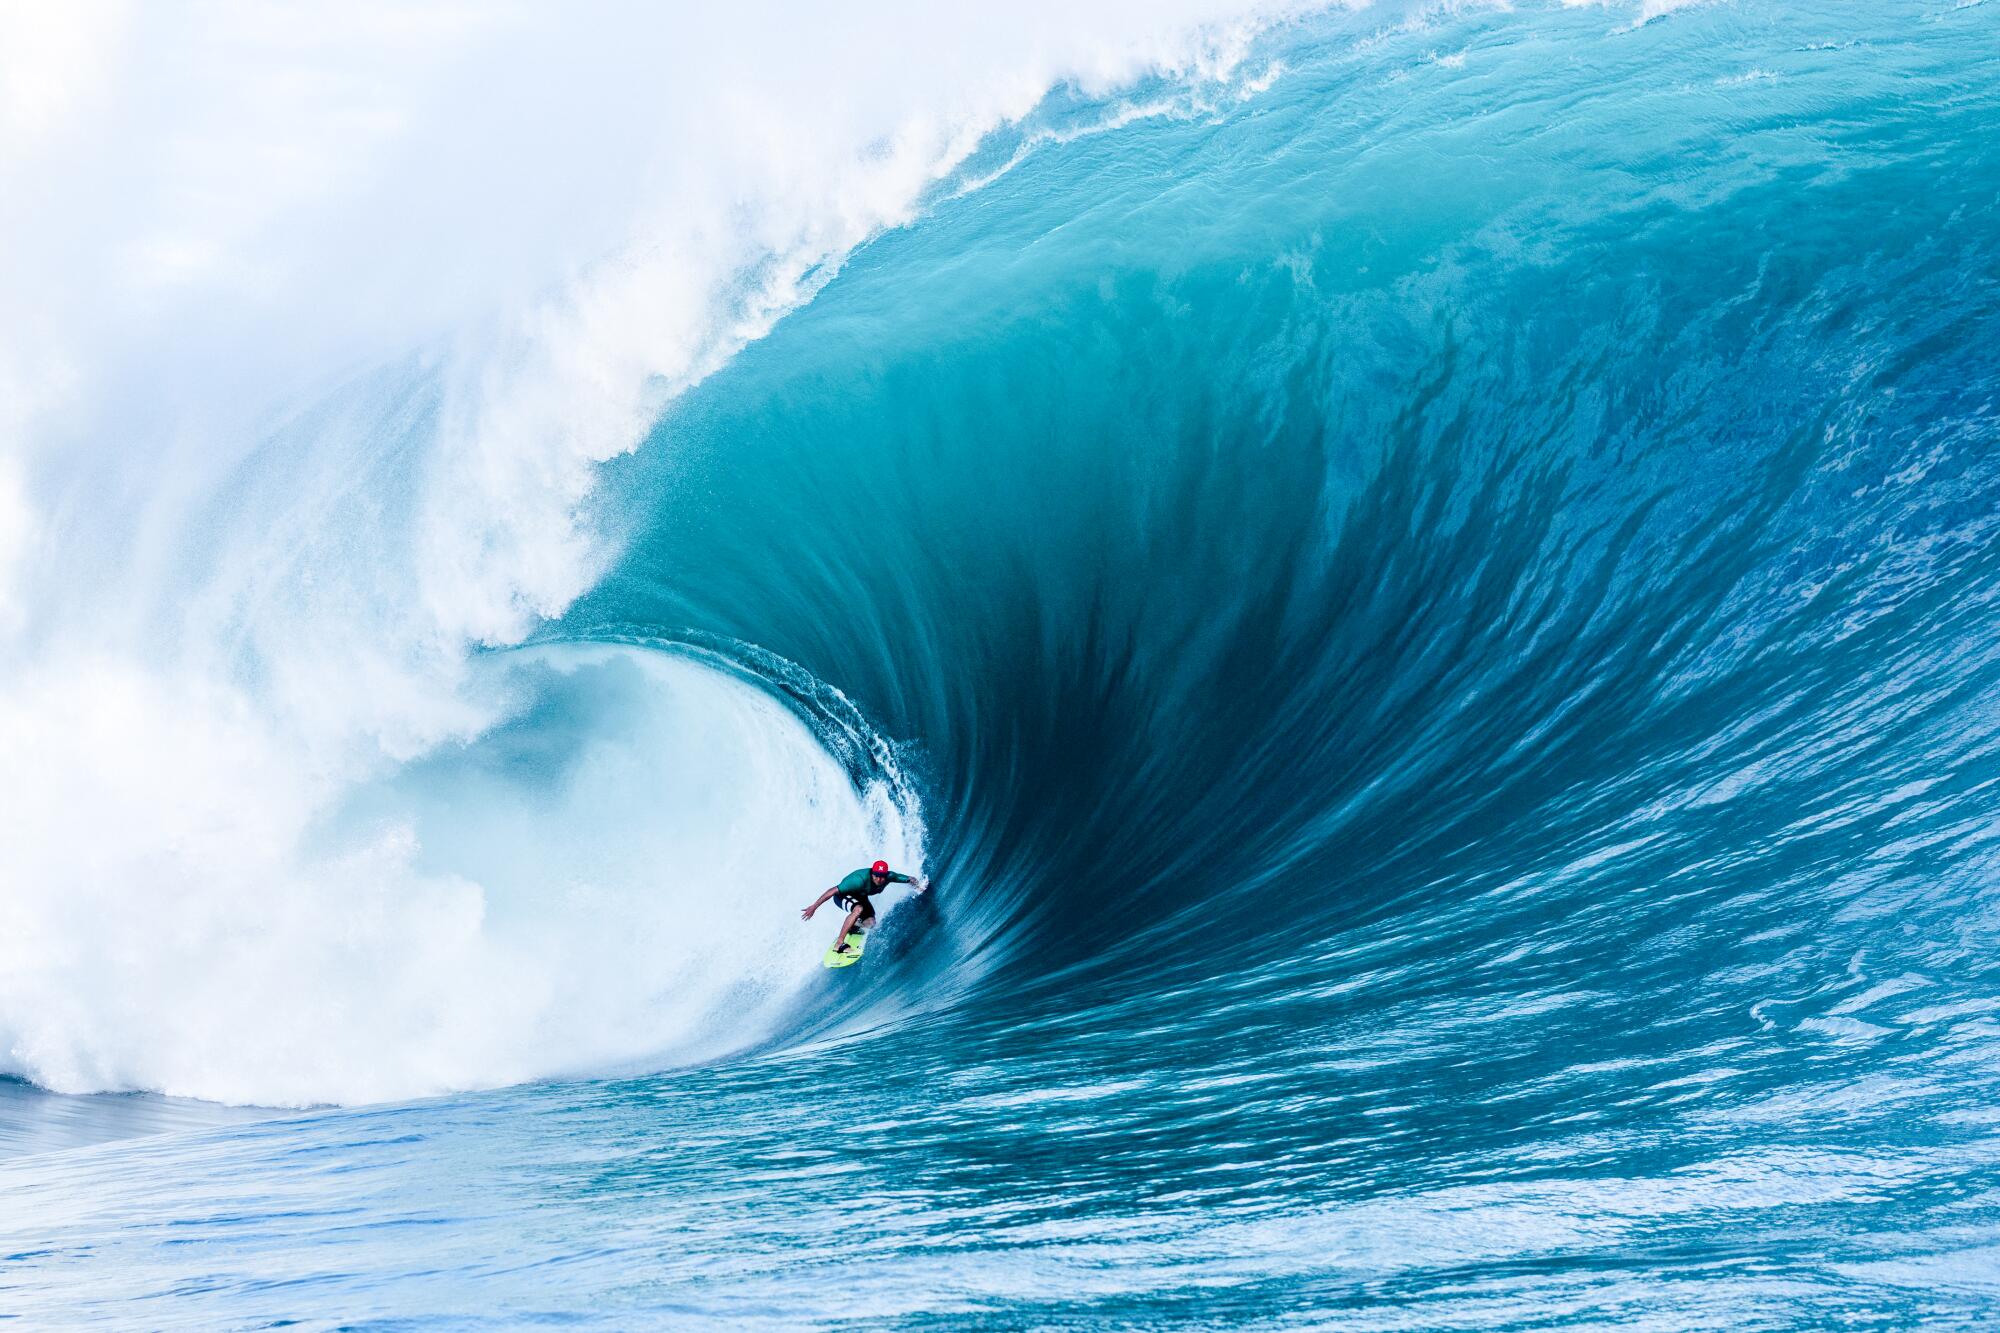 A lone surfer rides a massive, curling blue wave off the coast of Tahiti.